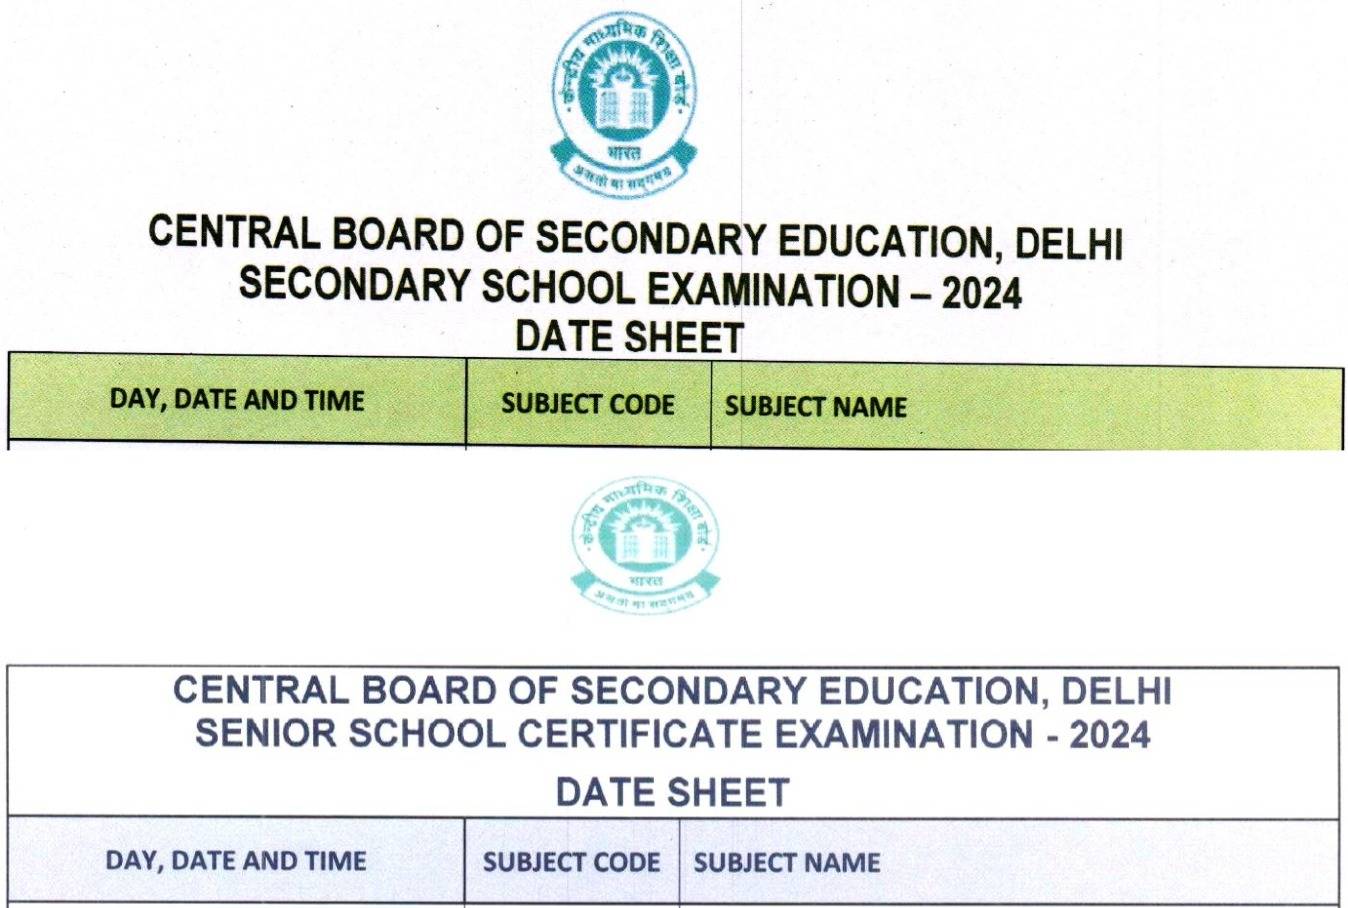 CBSE Class 10, 12 Results Out: Top Highlights and Exam Dates for 2025 Board Exams